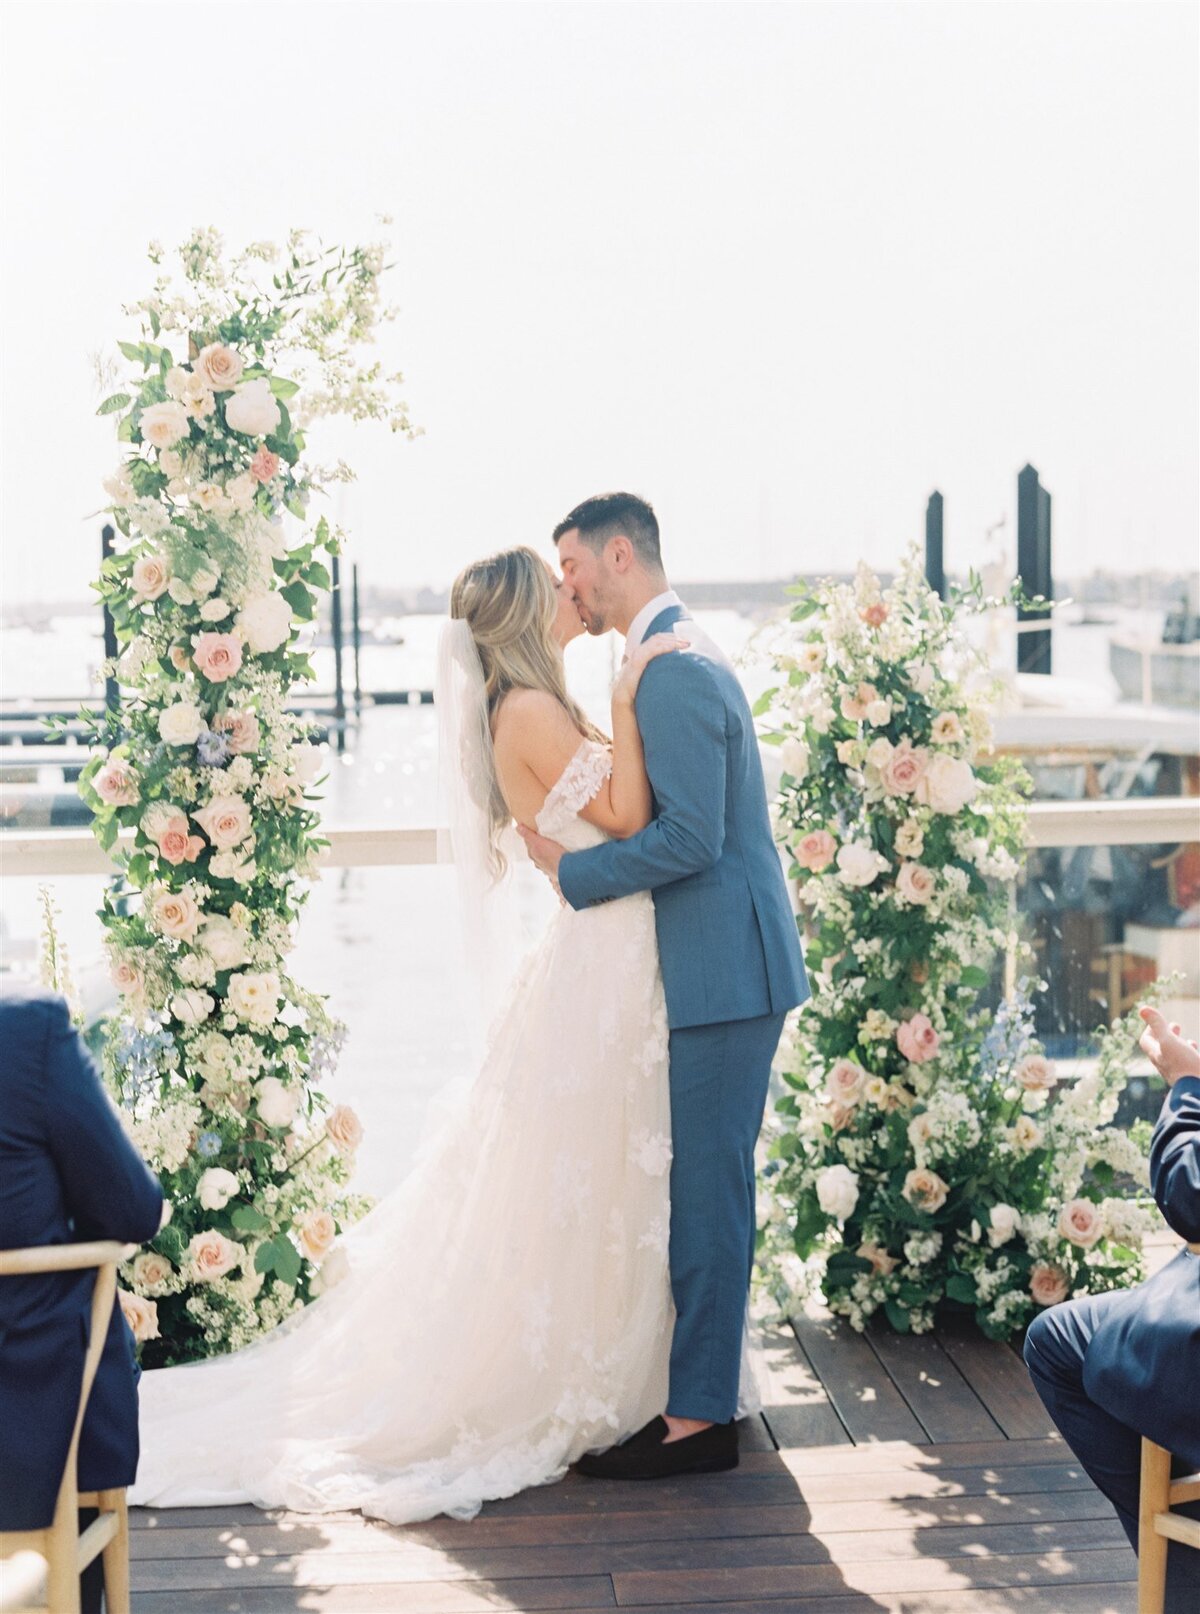 Kate-Murtaugh-Events-wedding-planner-Newport-ceremony-floral-arch-boat-dock-harbor-first-kiss